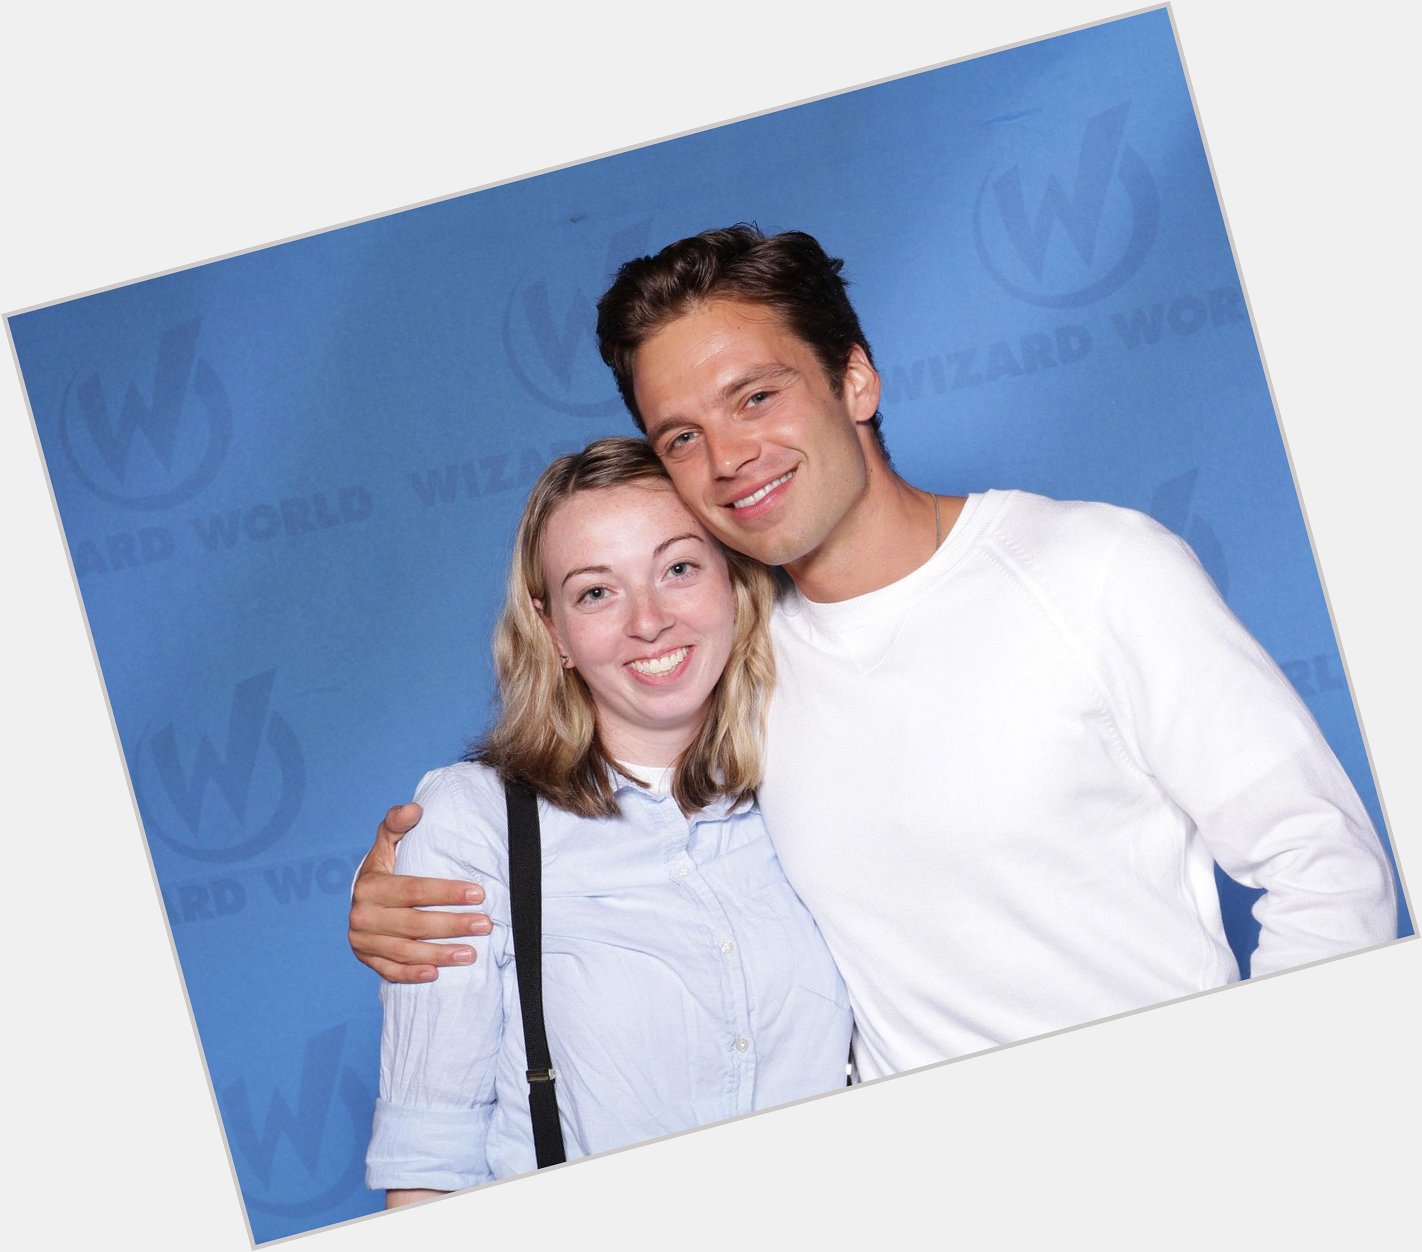 Happy Birthday to this beautiful man, Sebastian Stan! Thanks so much for the hug! <3 <3 <3 